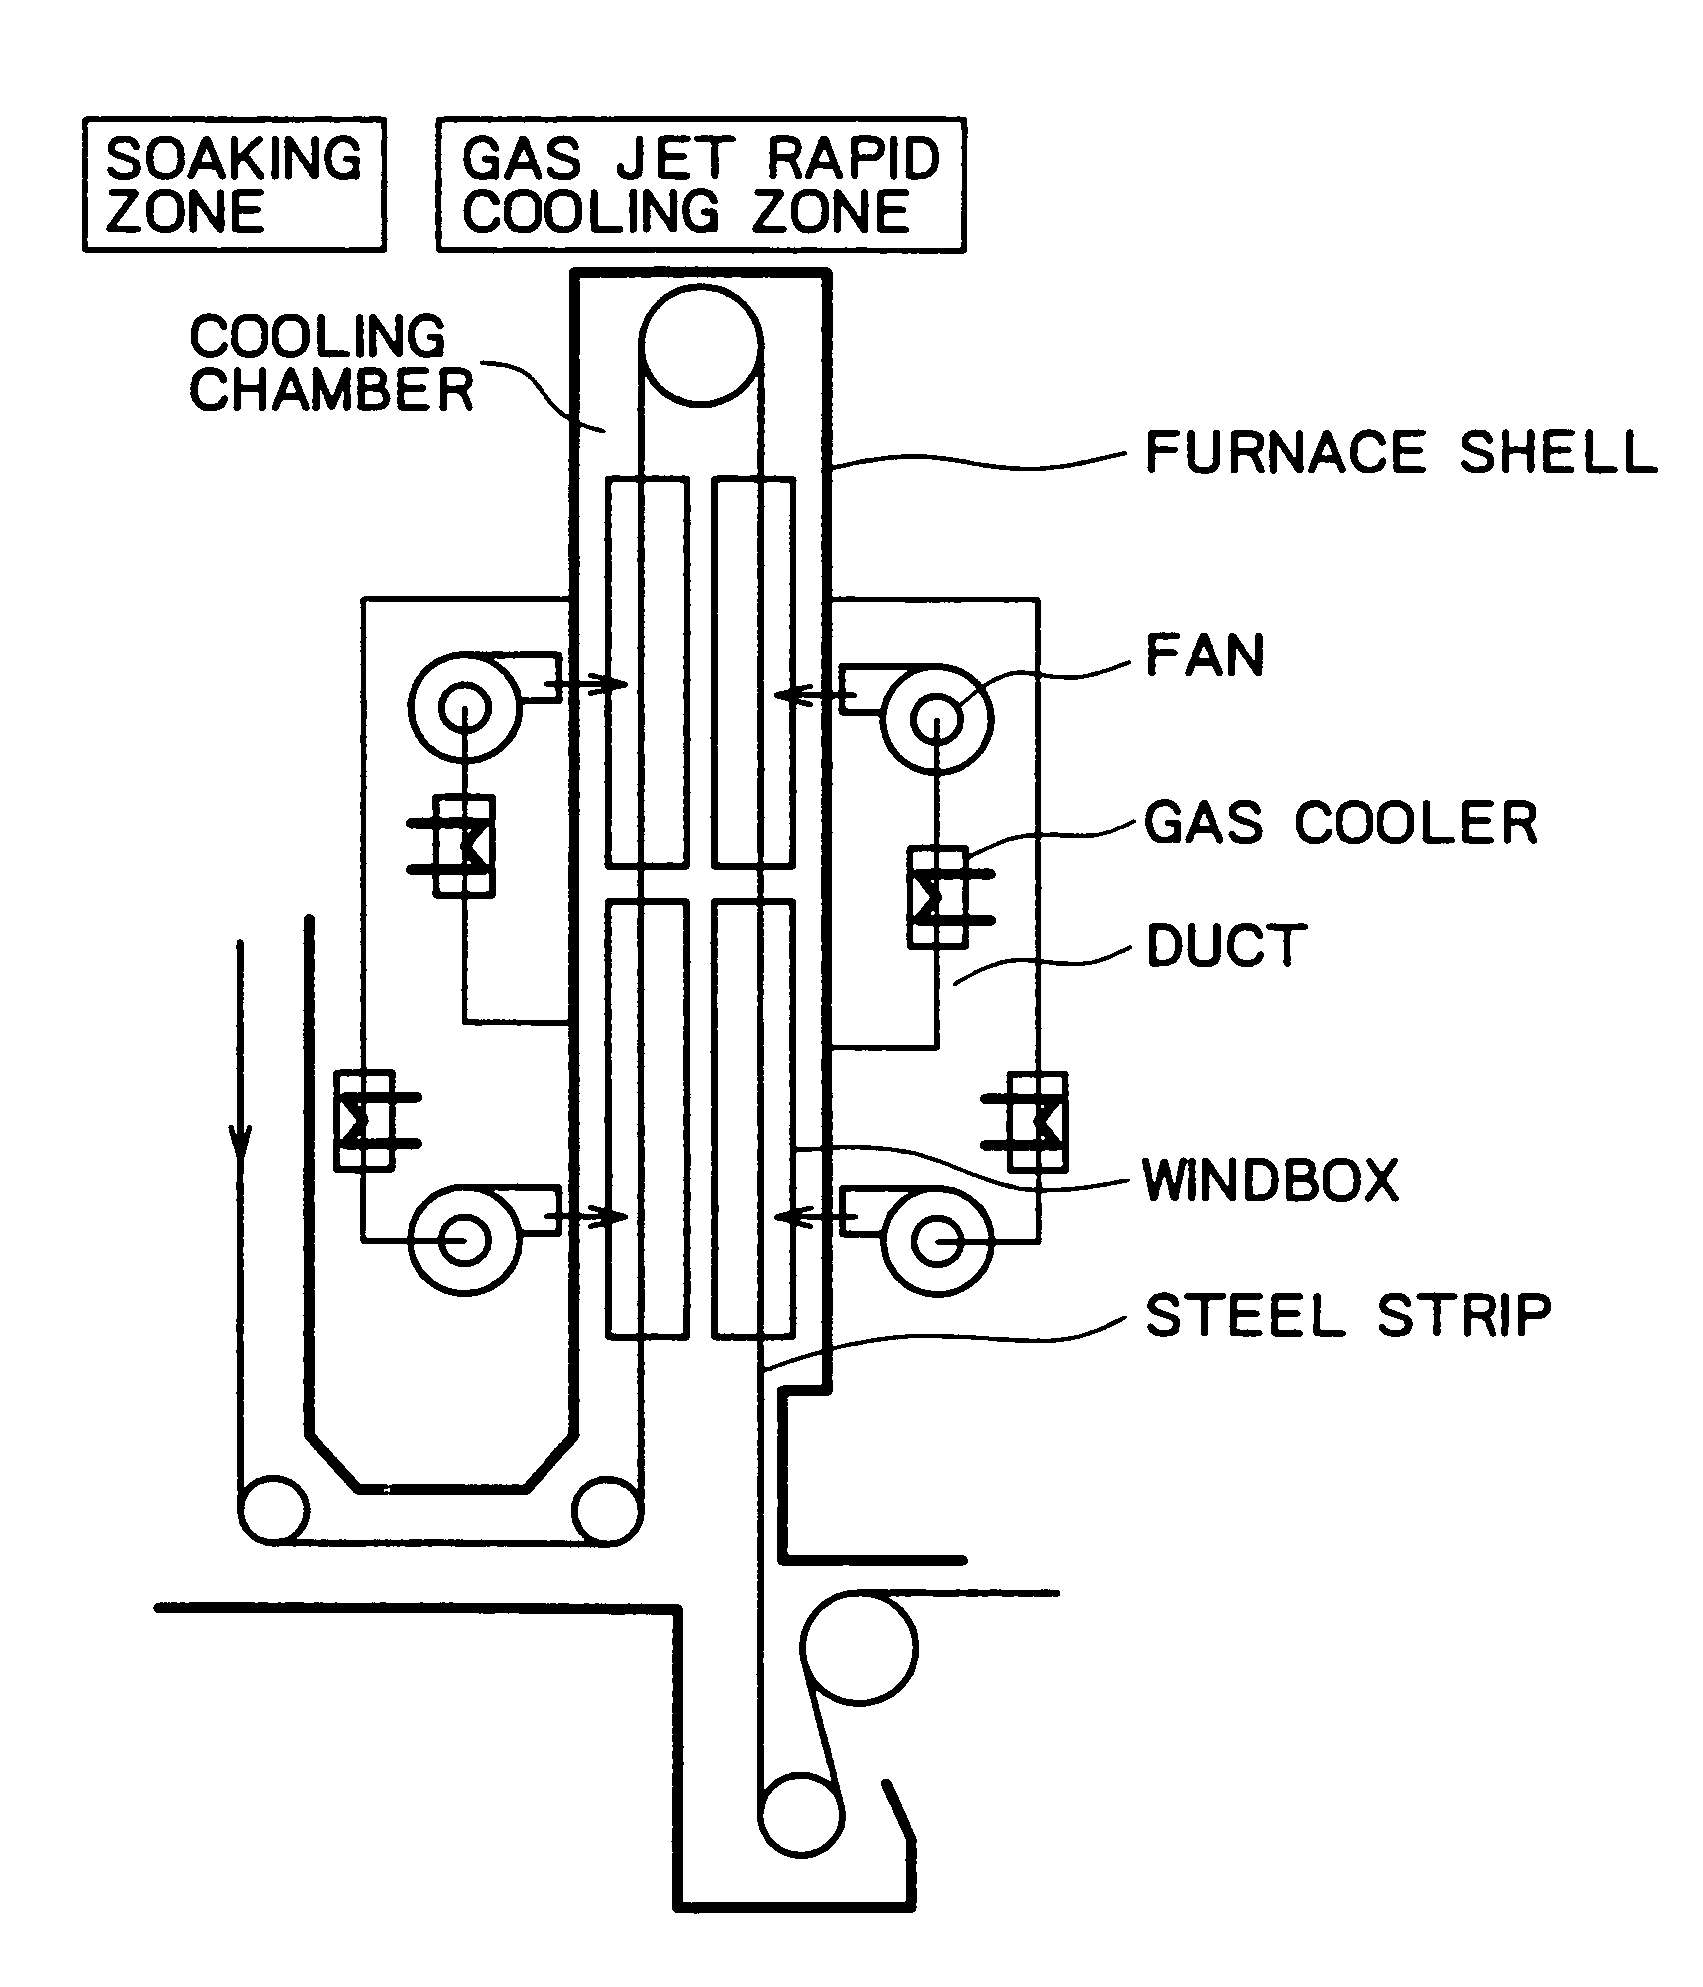 Gas jet cooling device